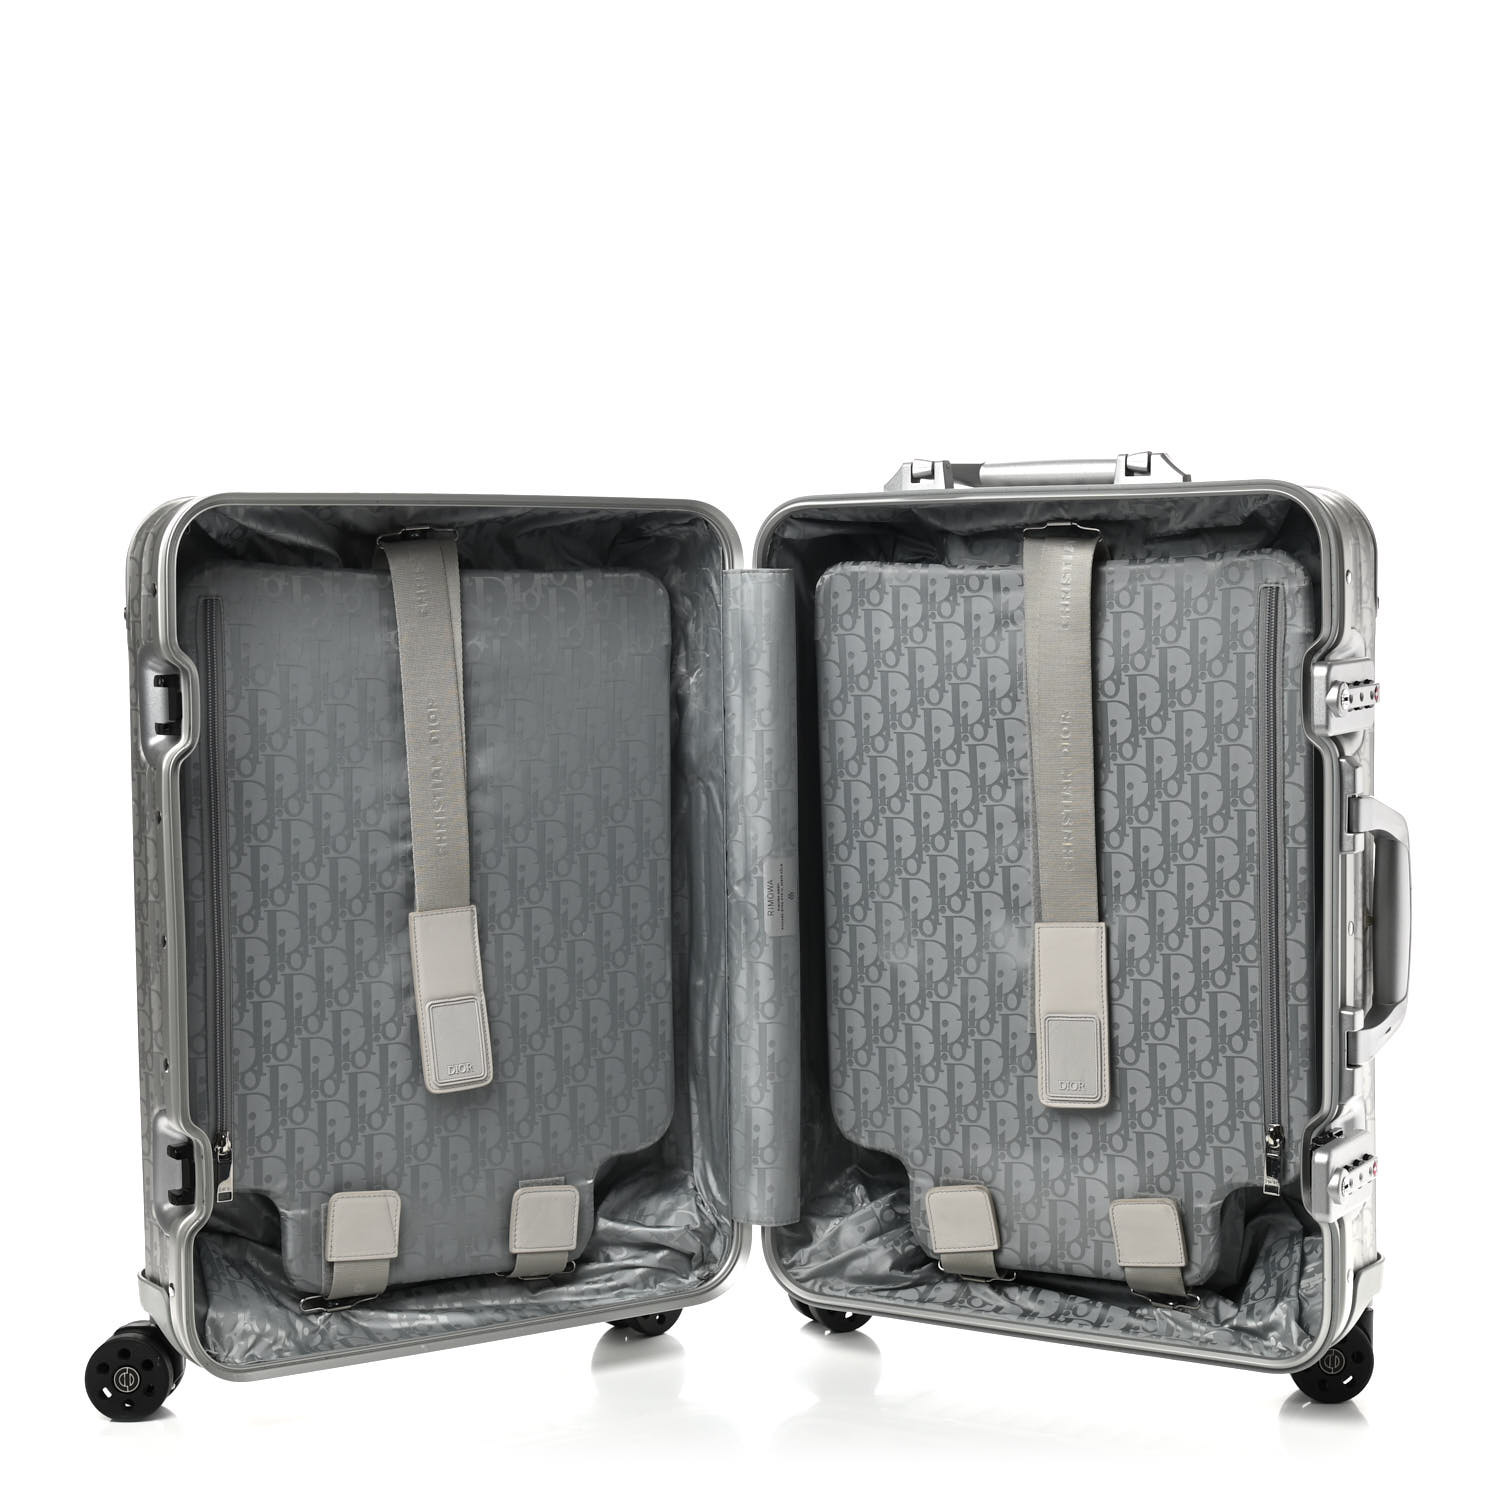 DIOR AND RIMOWA Carry-On Luggage Gradient Blue Dior Oblique Aluminum